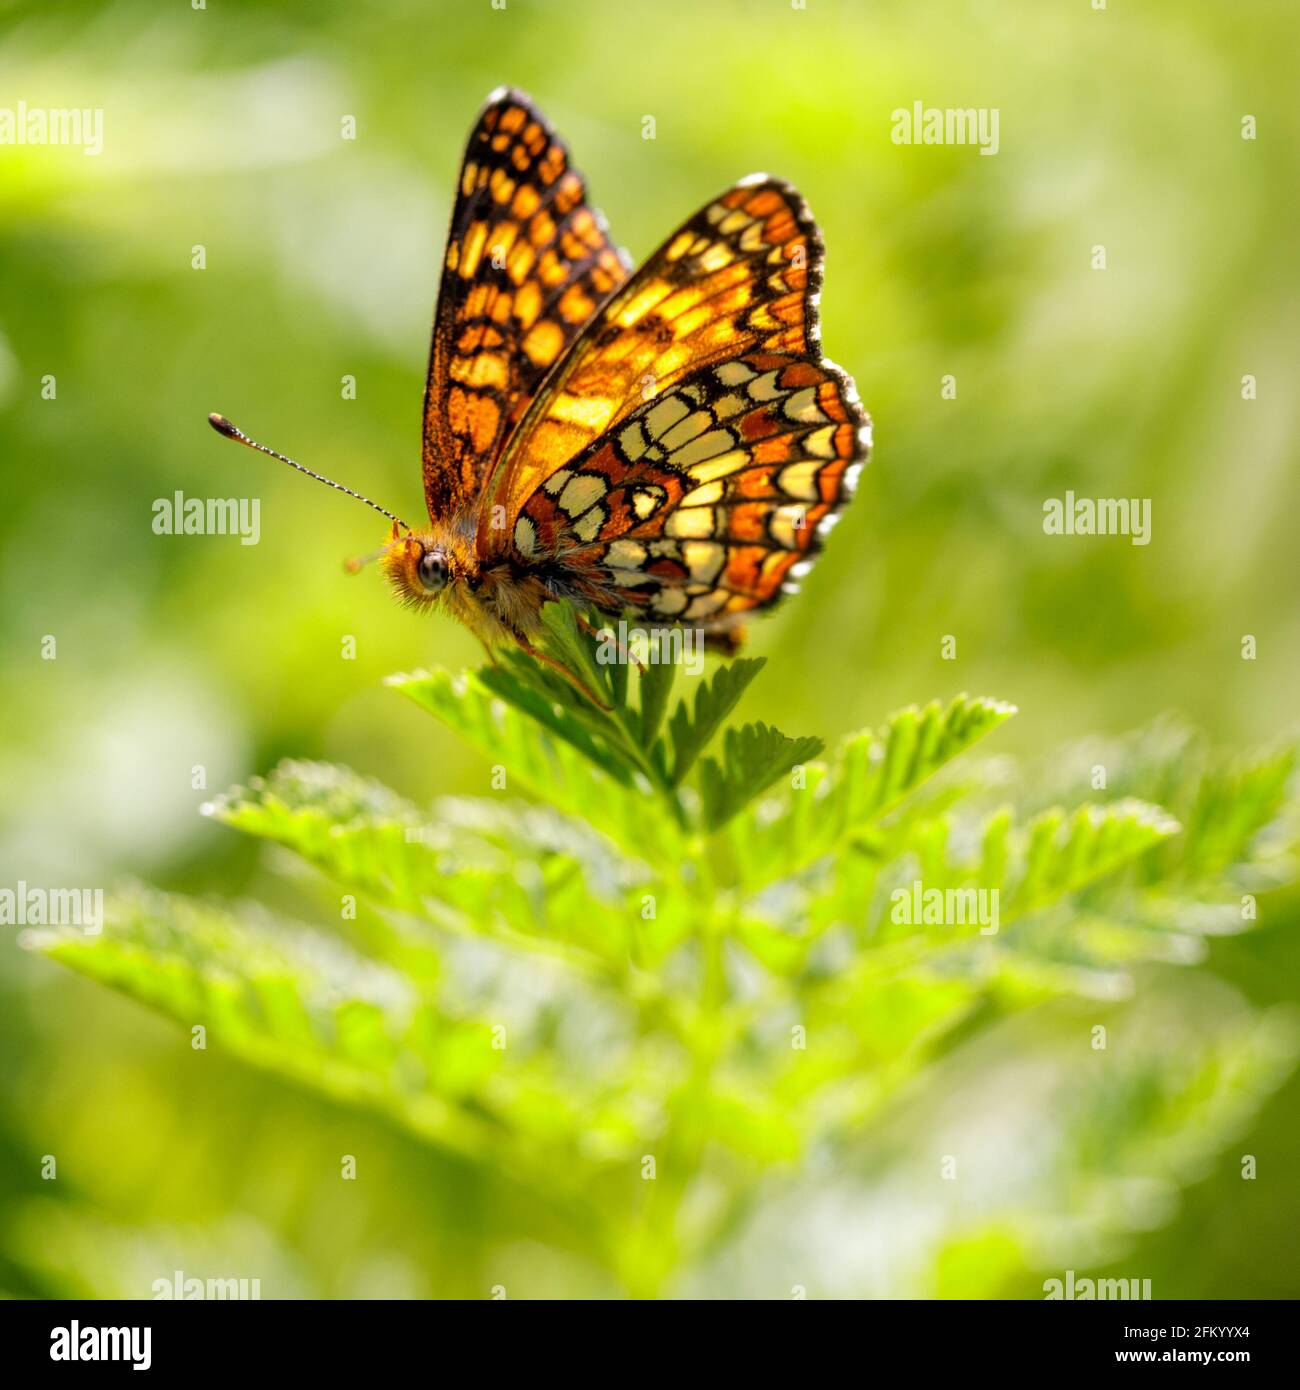 Northern Checkerspot butterfly perched on a plant. Foothills Park, Santa Clara County, California, USA. Stock Photo